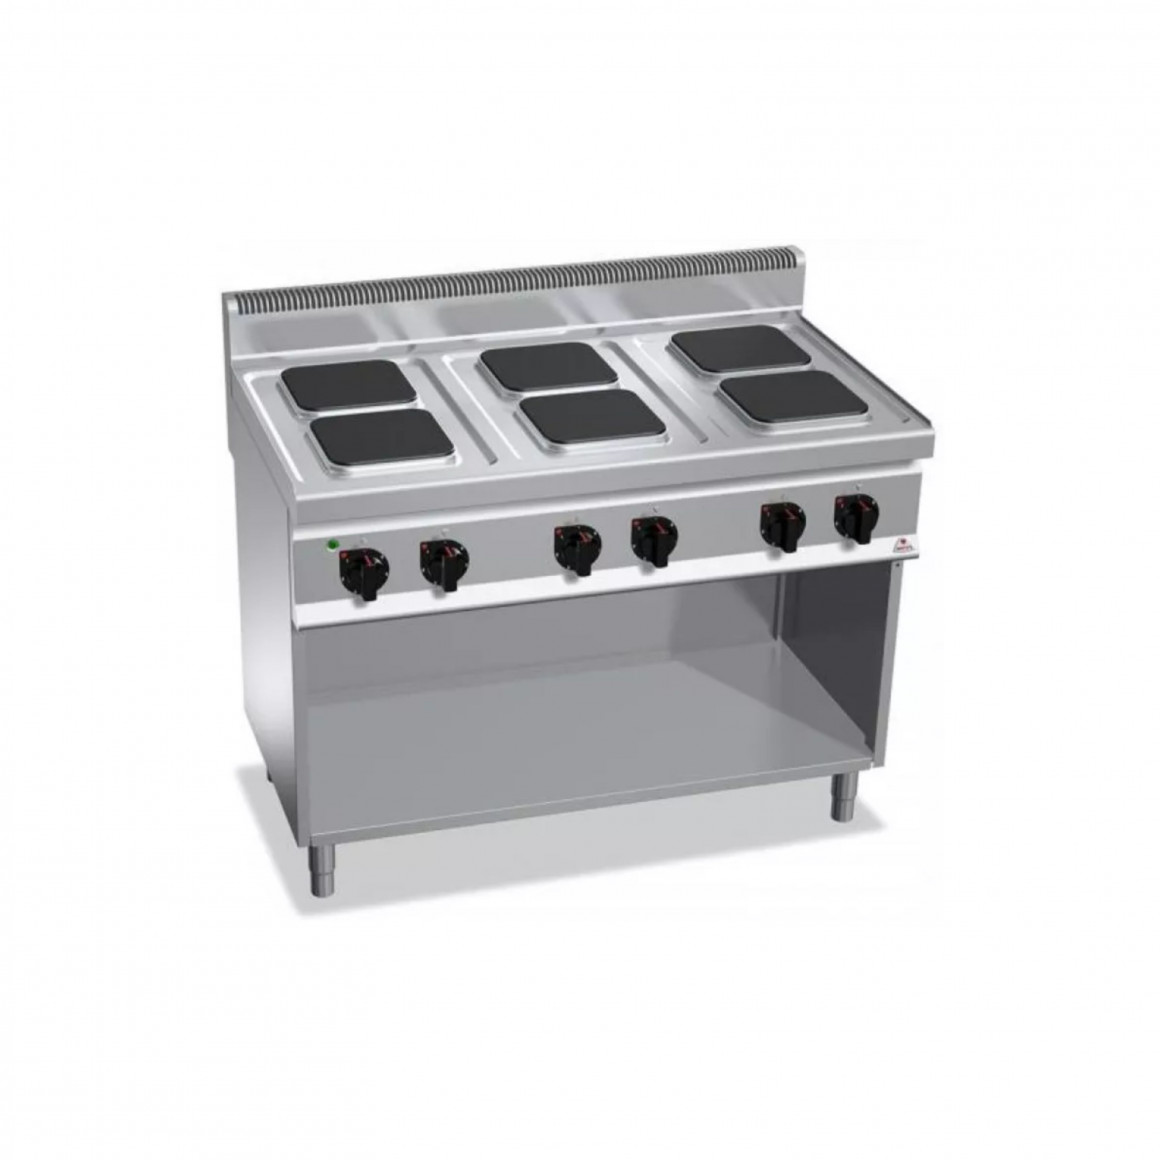 Electric stove 6 PLATE,E7PQ6M, HIGH POWER